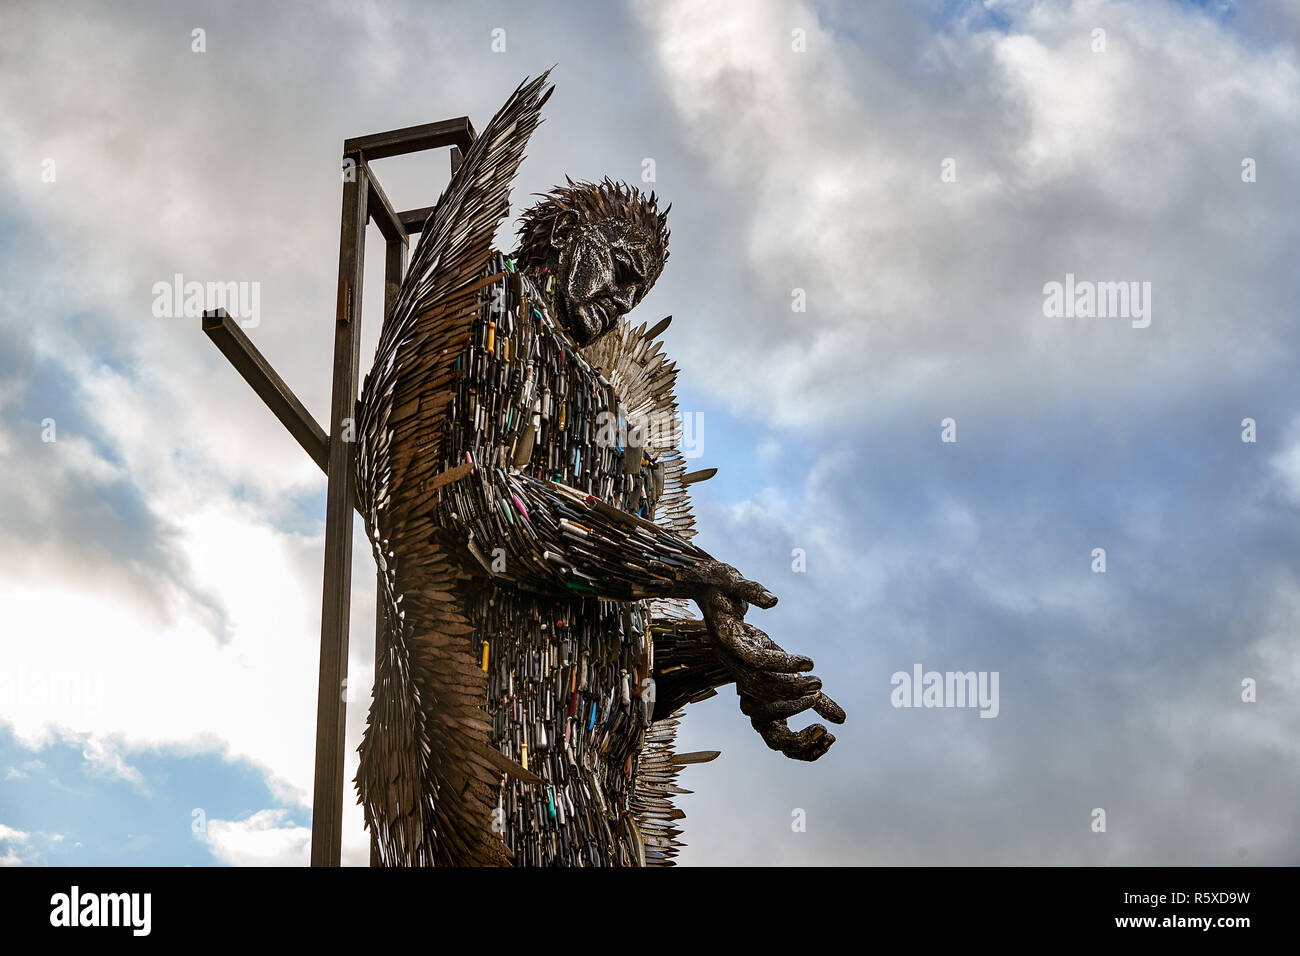 The Knife Angel on display in Liverpool. 2nd Dec, 2018. A statue made from 100,000 confiscated knives to create an'awareness of knife crime in the UK, and the damages it causes to families all around.'' and created as a national monument against violence and aggression Credit: Andy Von Pip/ZUMA Wire/Alamy Live News Stock Photo